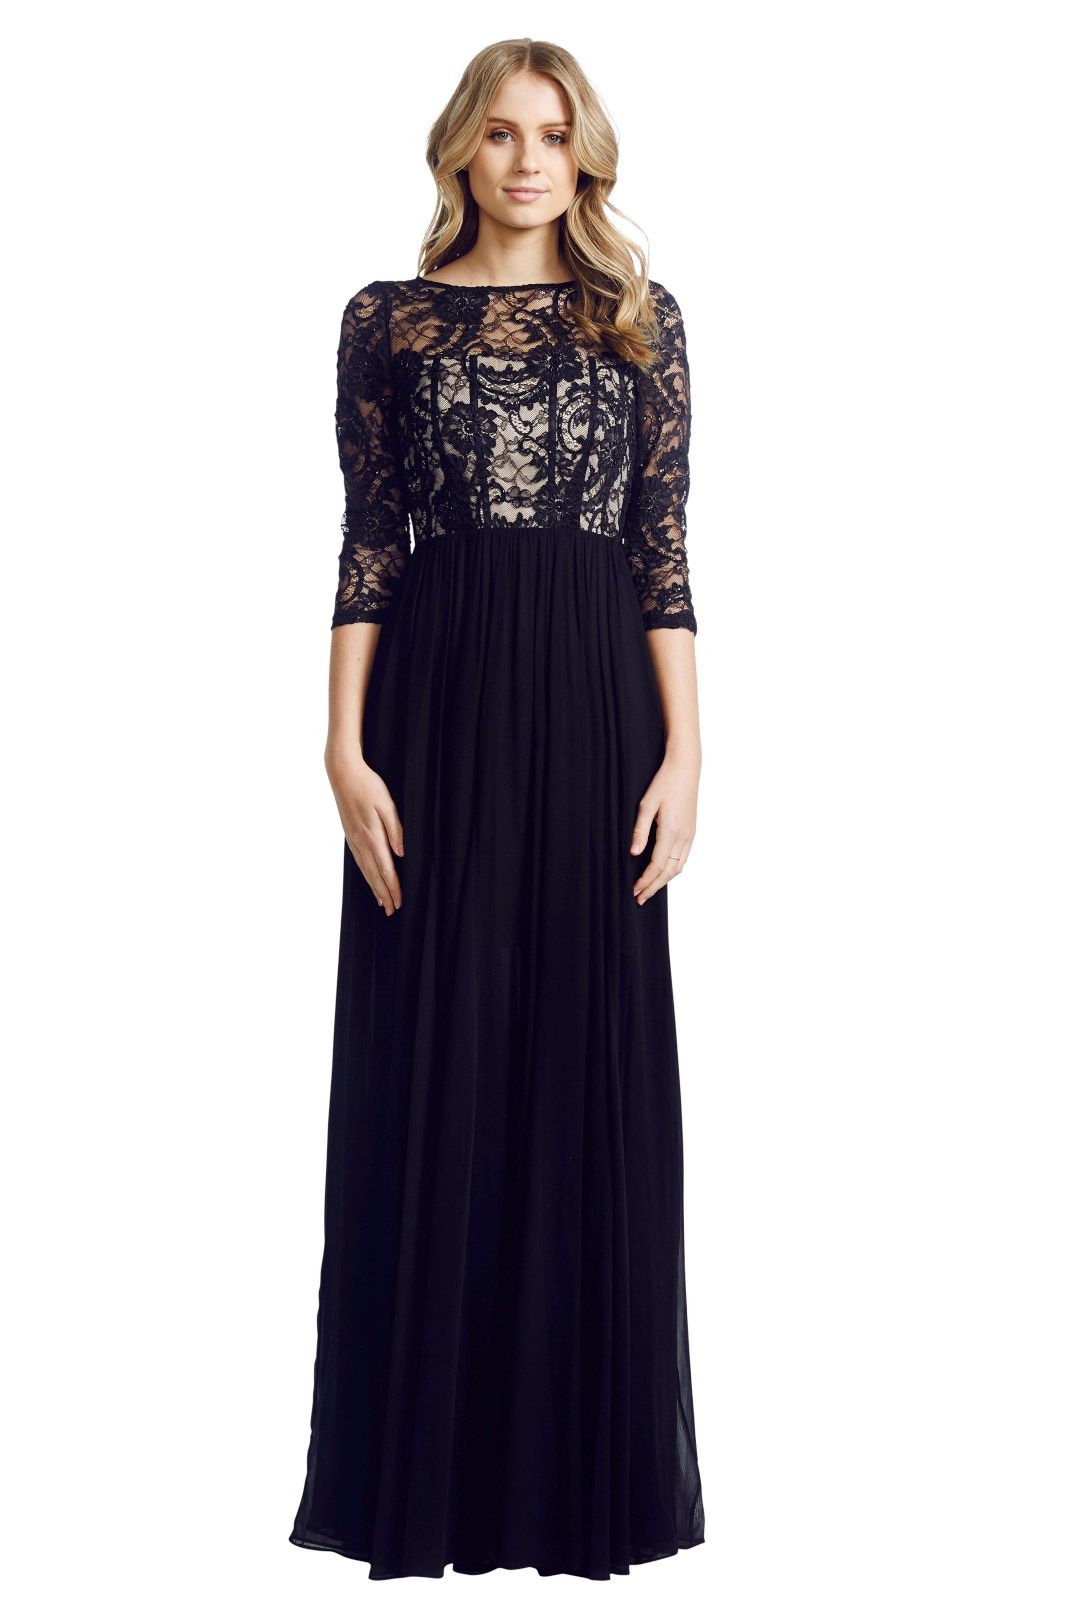 Alice and Olivia - Robinson Sequined Lace and Silk-Georgette Gown - Black - Front